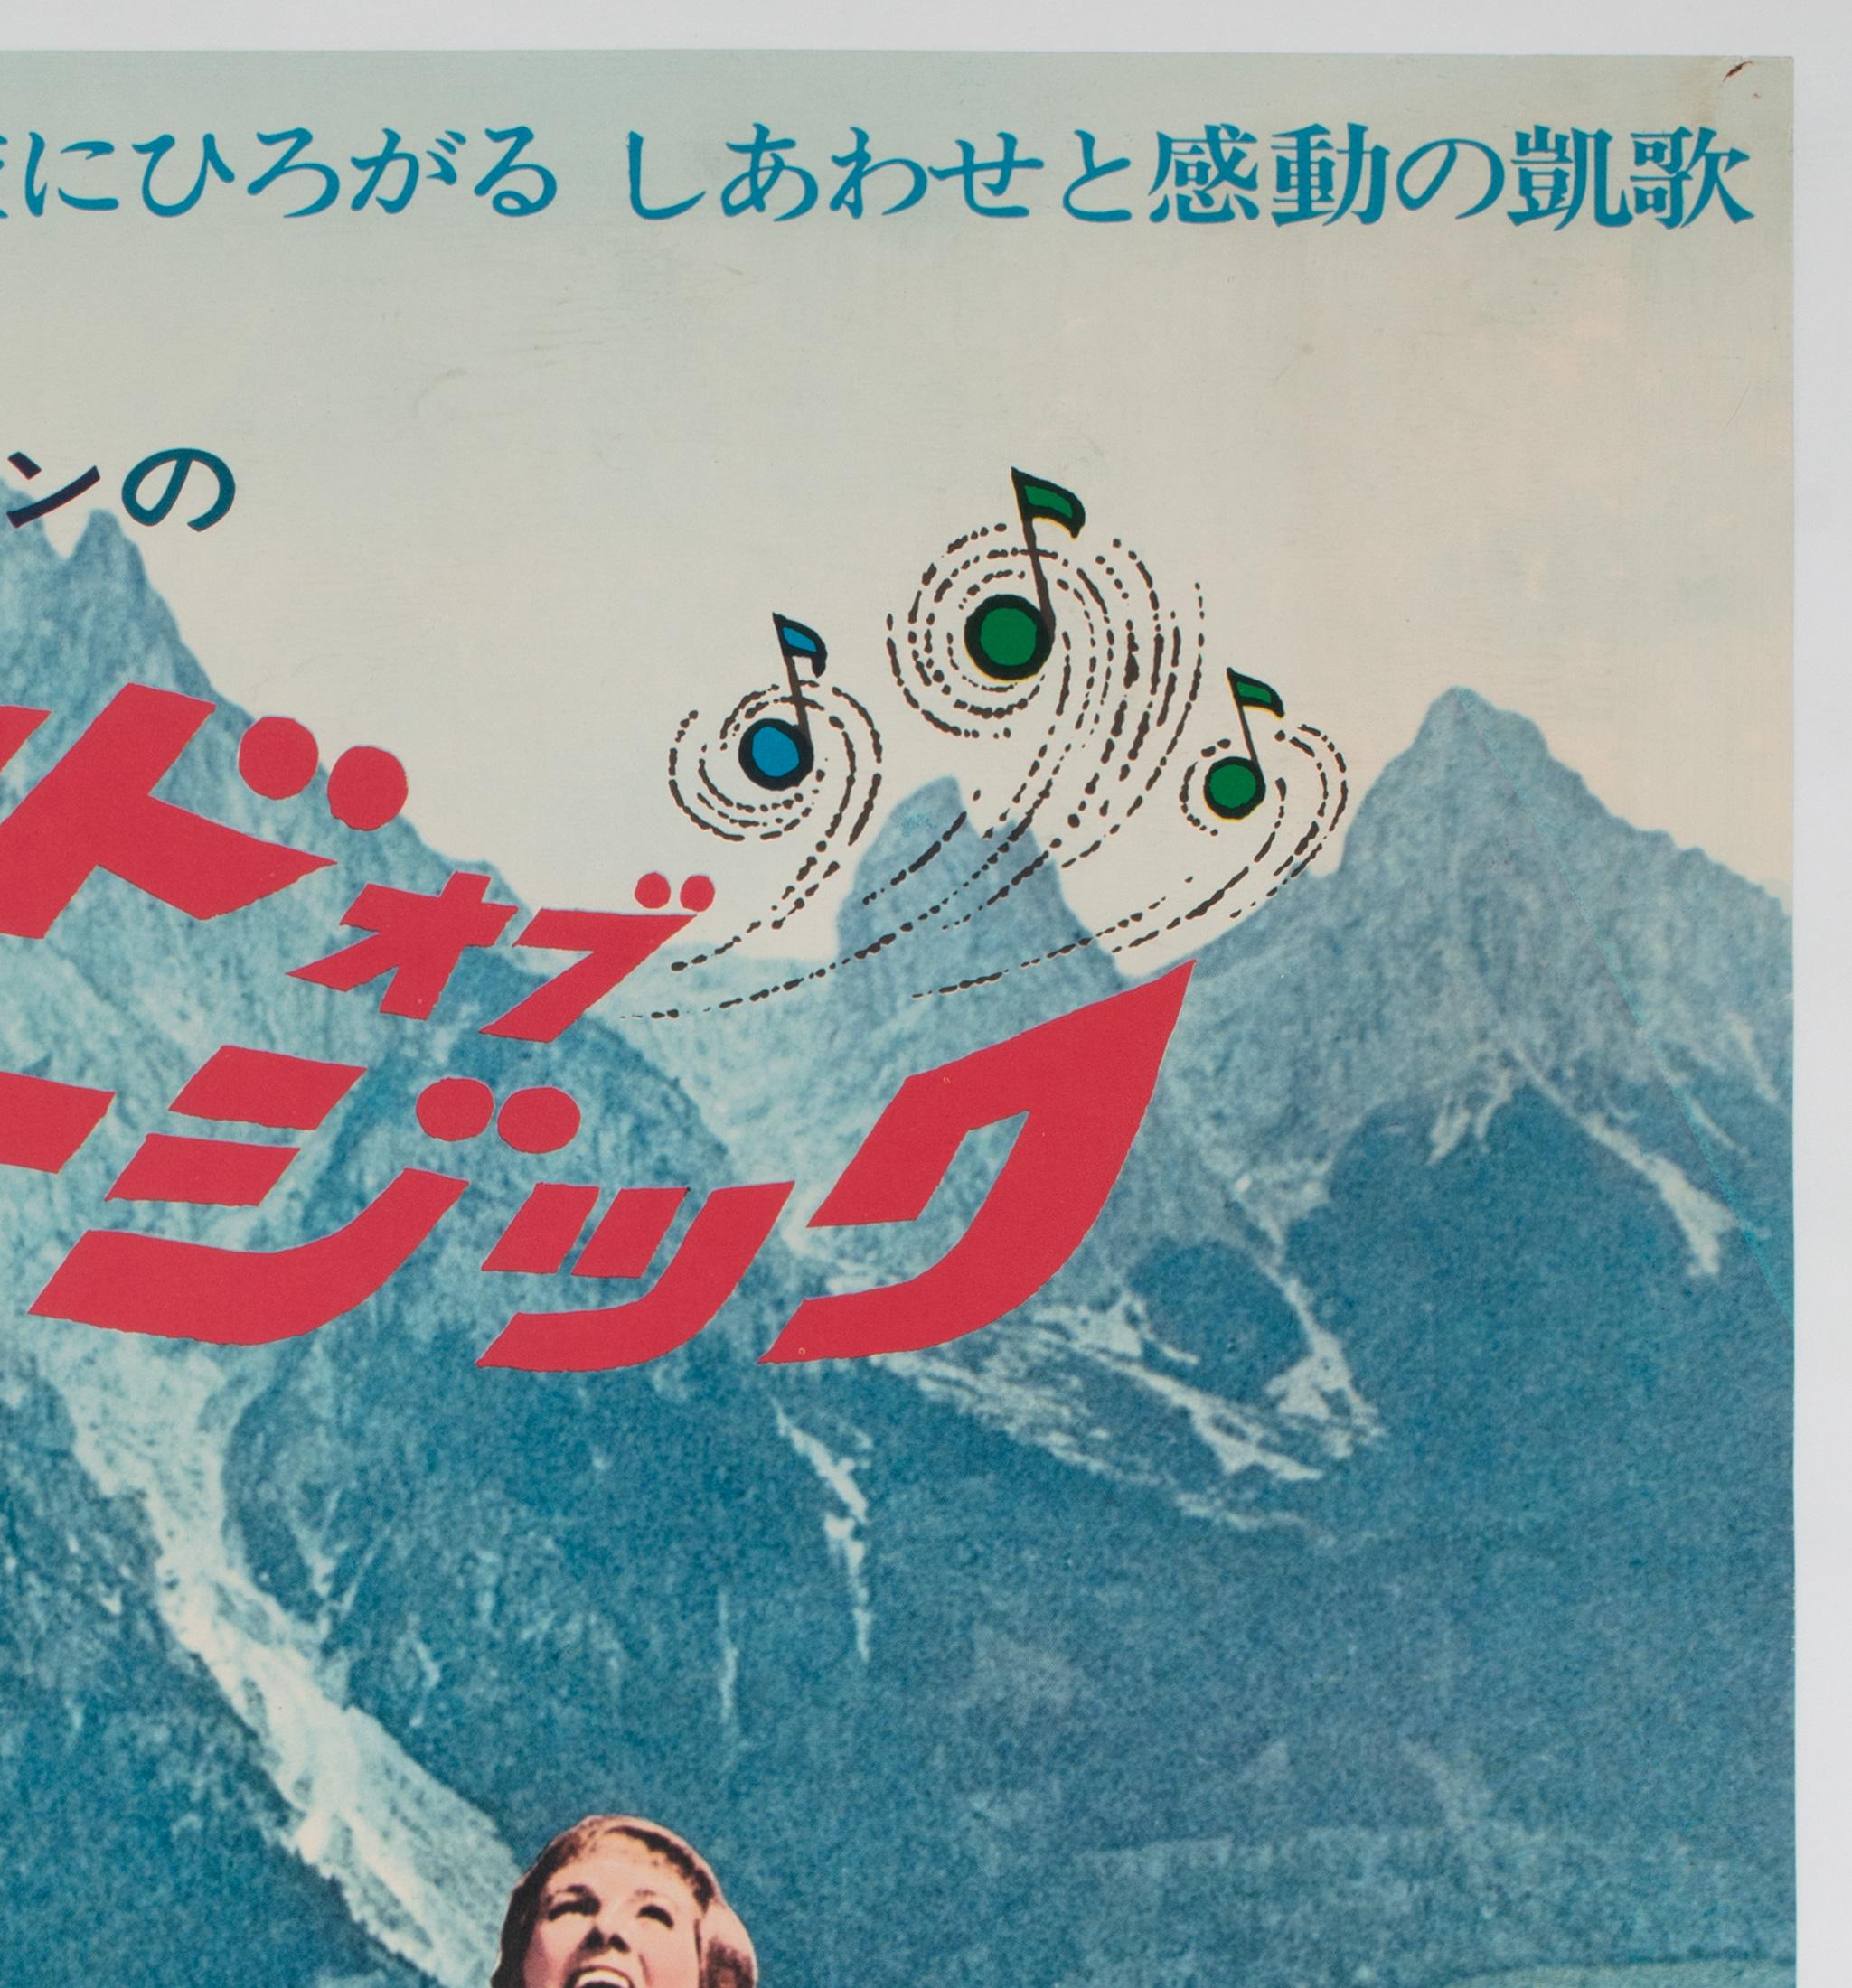 Original Japanese film poster for a 1970 70mm TODD-AD re-release in Japan of much-loved Musical The Sound of Music. Love design and colours. 

This vintage movie poster has been preofessionally linen-backed and is sized 20 x 28 3/4 inches (22 1/2